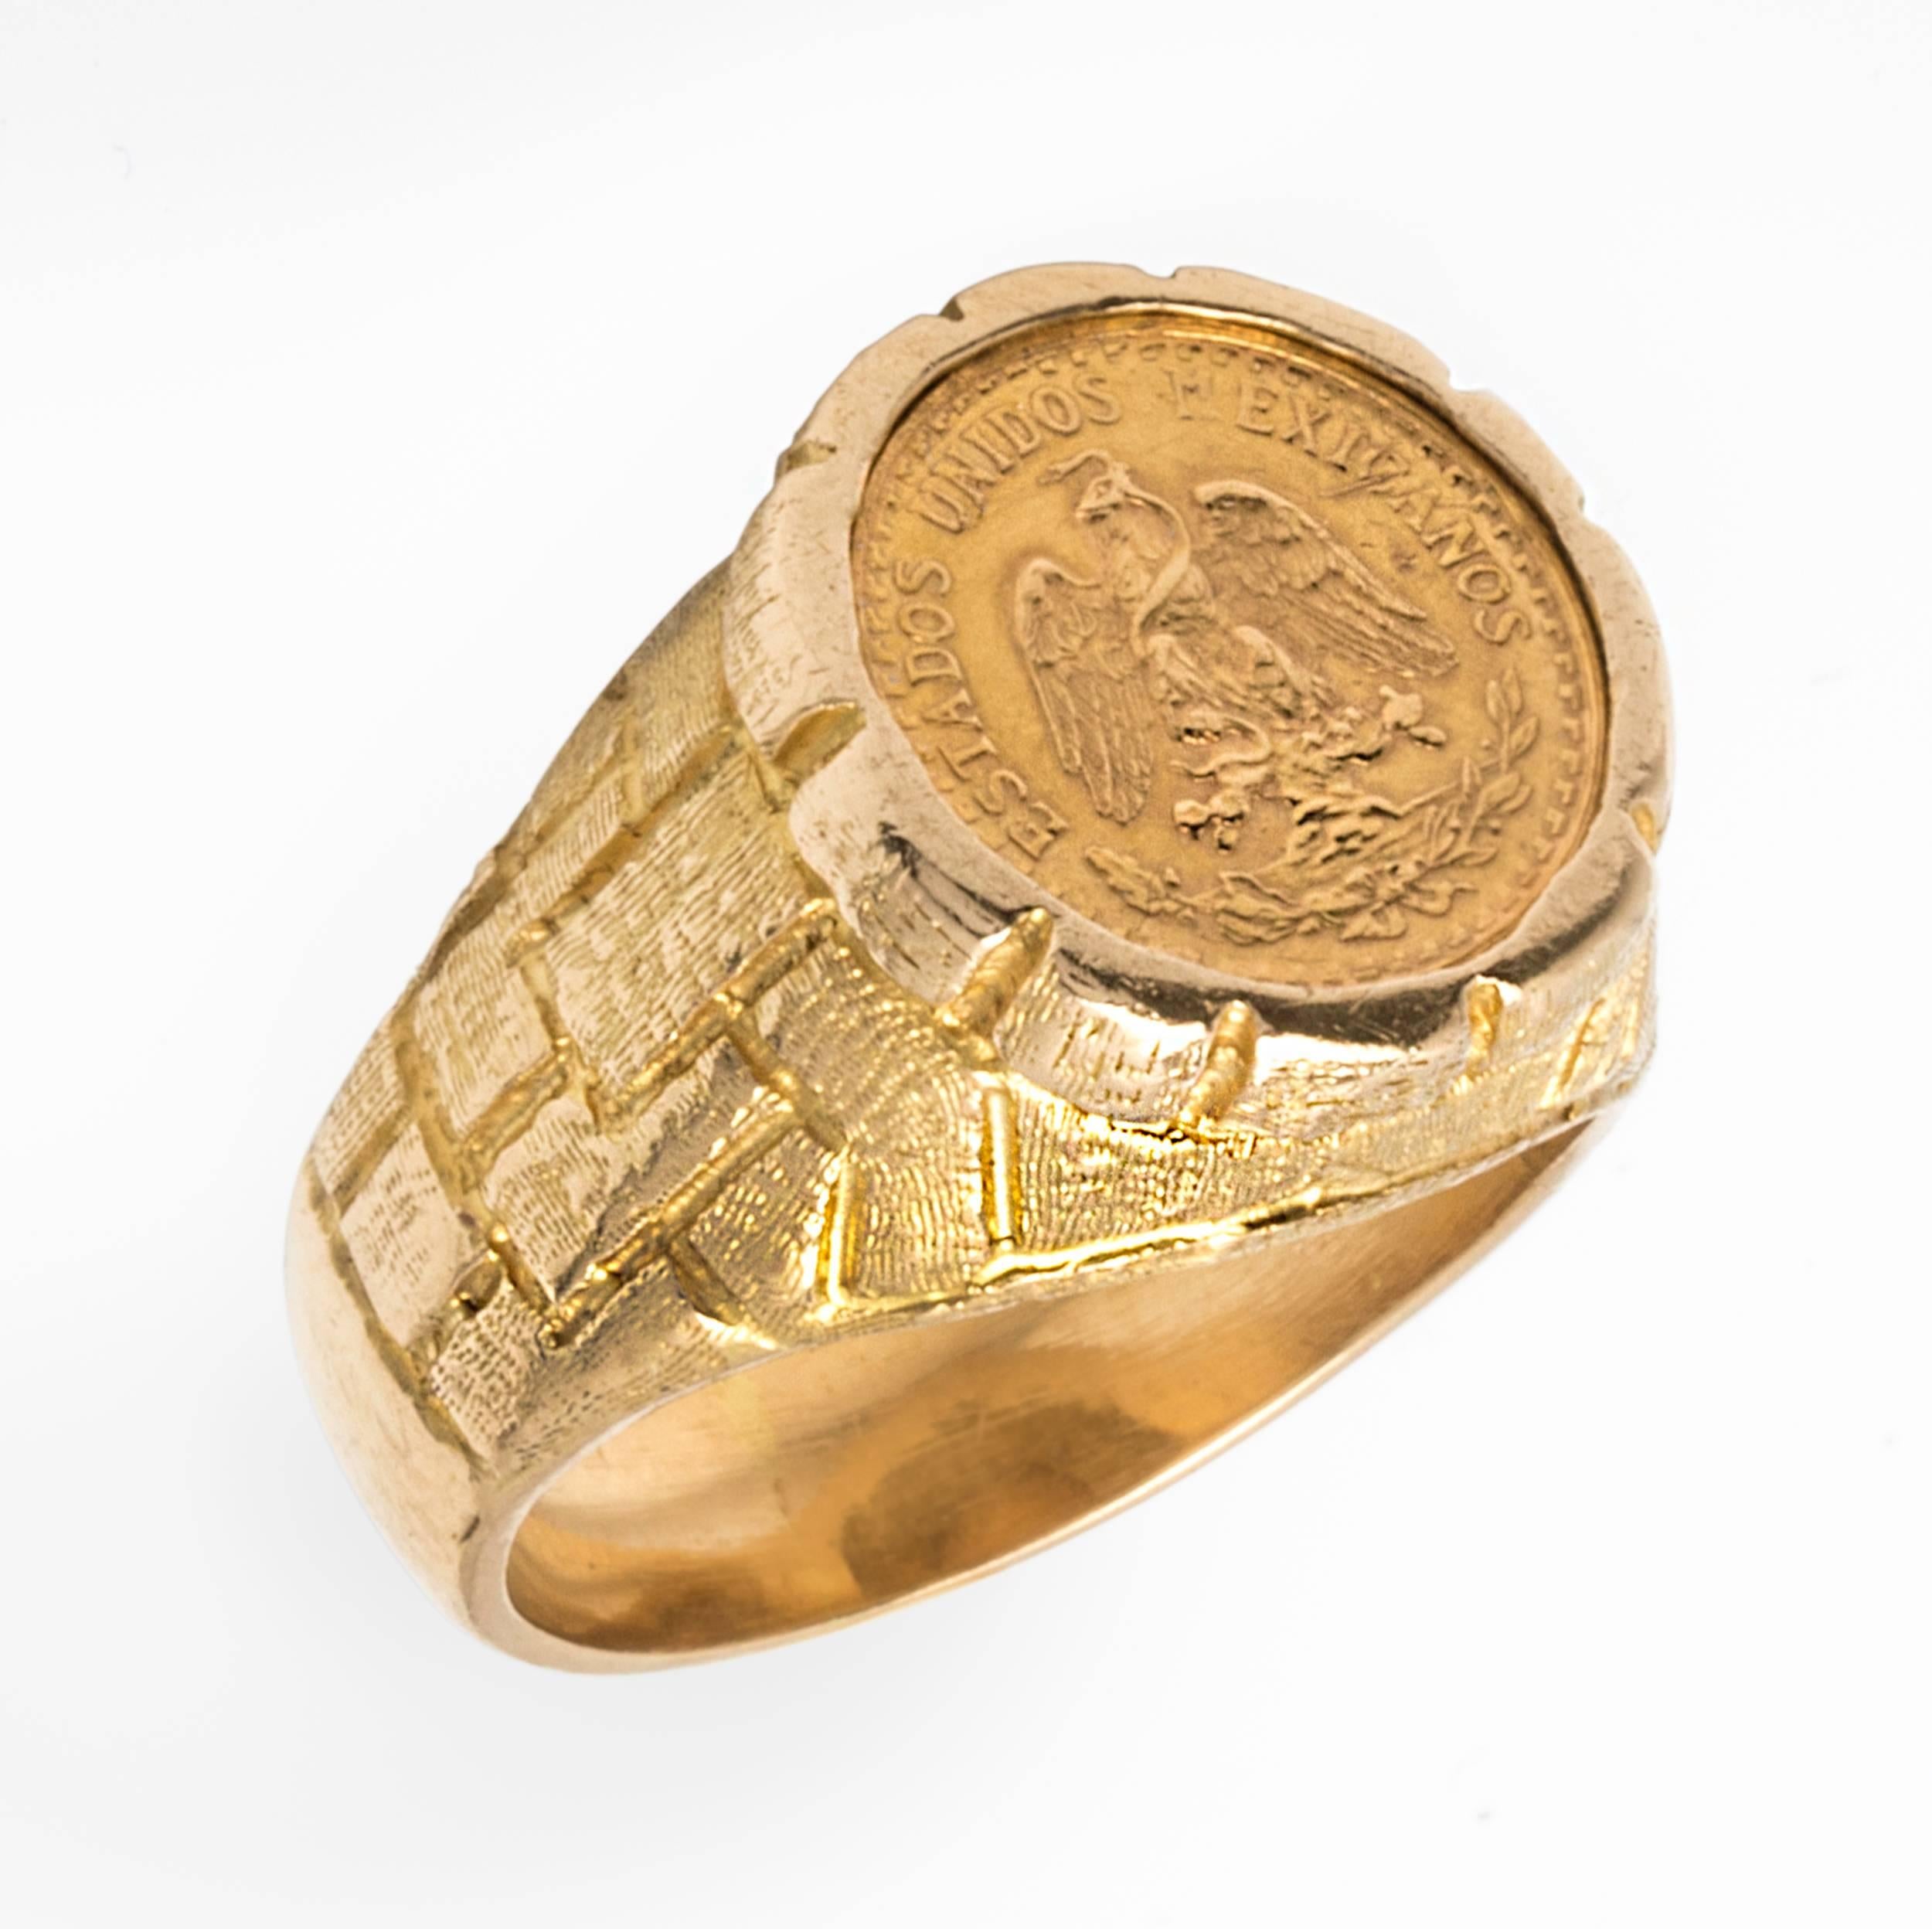 18k yellow gold.  Hallmarked Mexico and '18k D TORZAL'. Size 8.5
Dos pesos 1945.  Weight: 18.2g